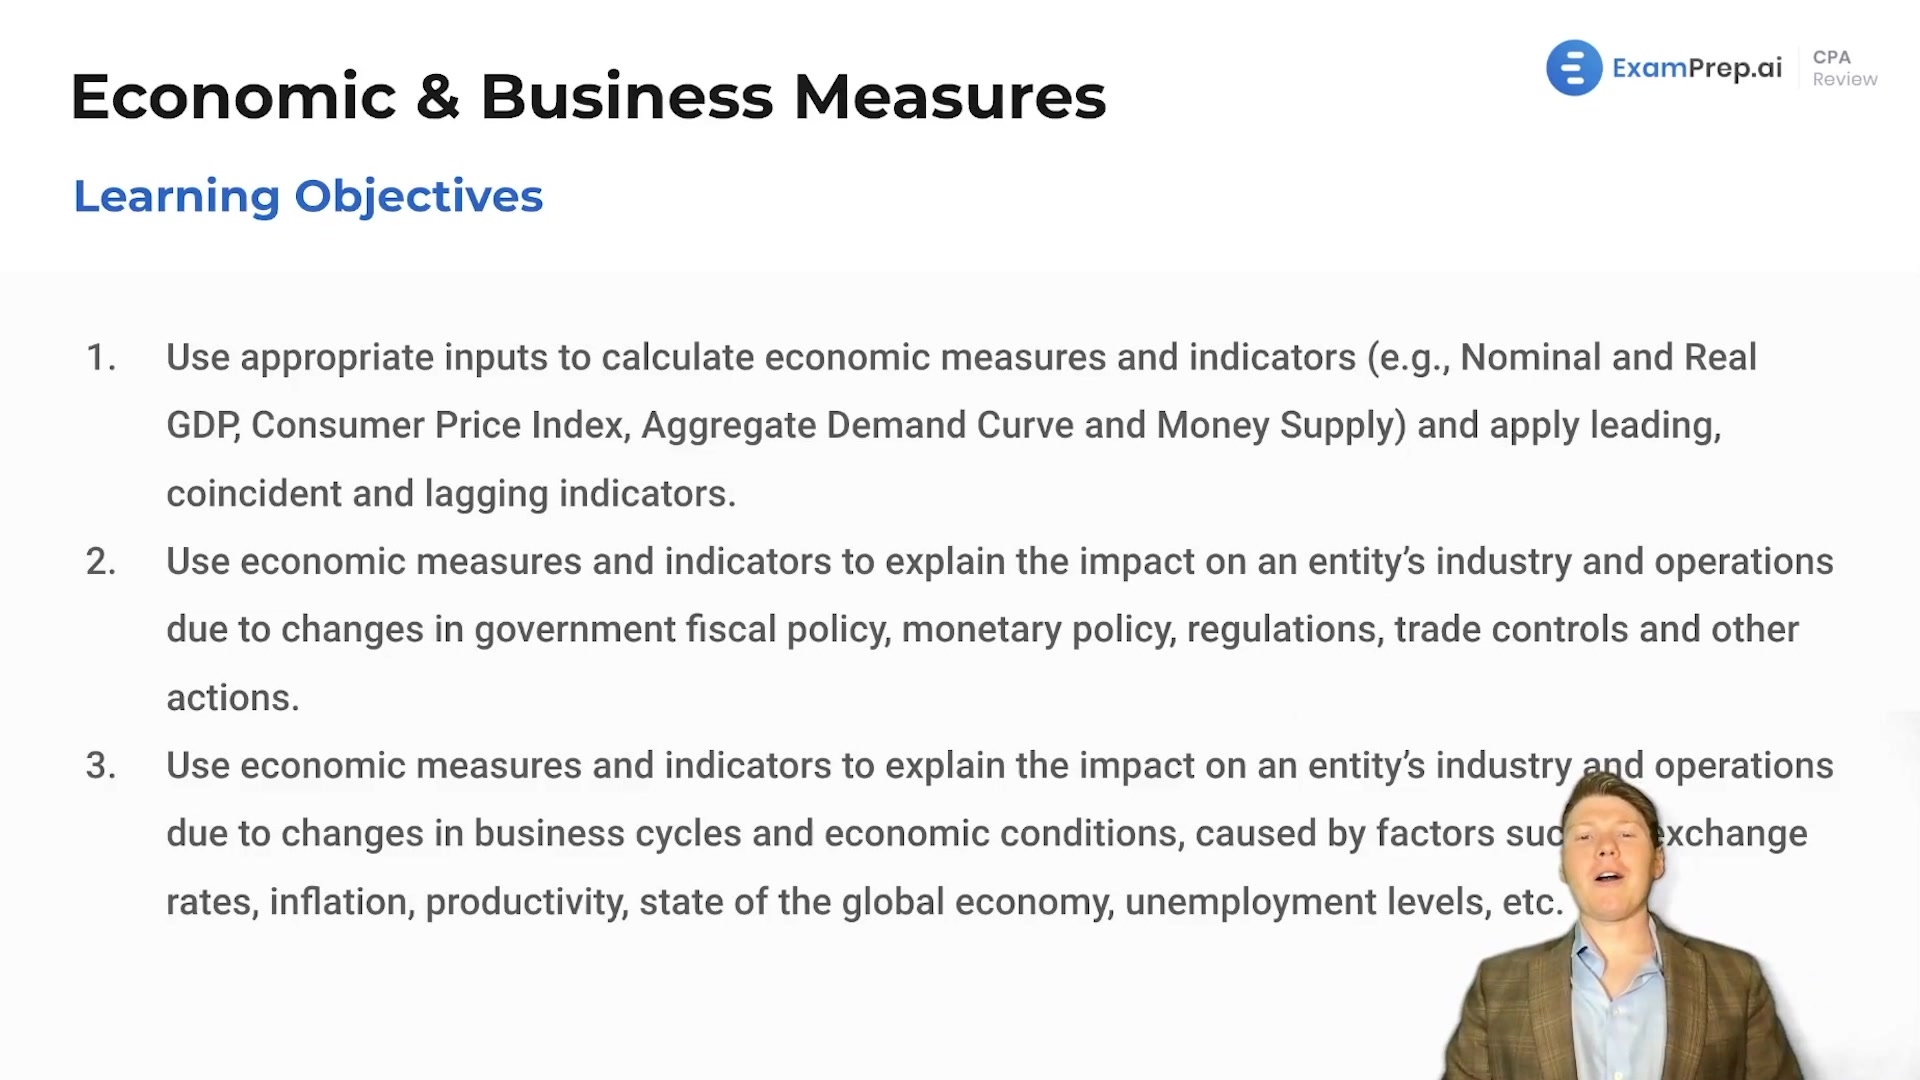 Economic and Business Measures Overview and Objectives lesson thumbnail